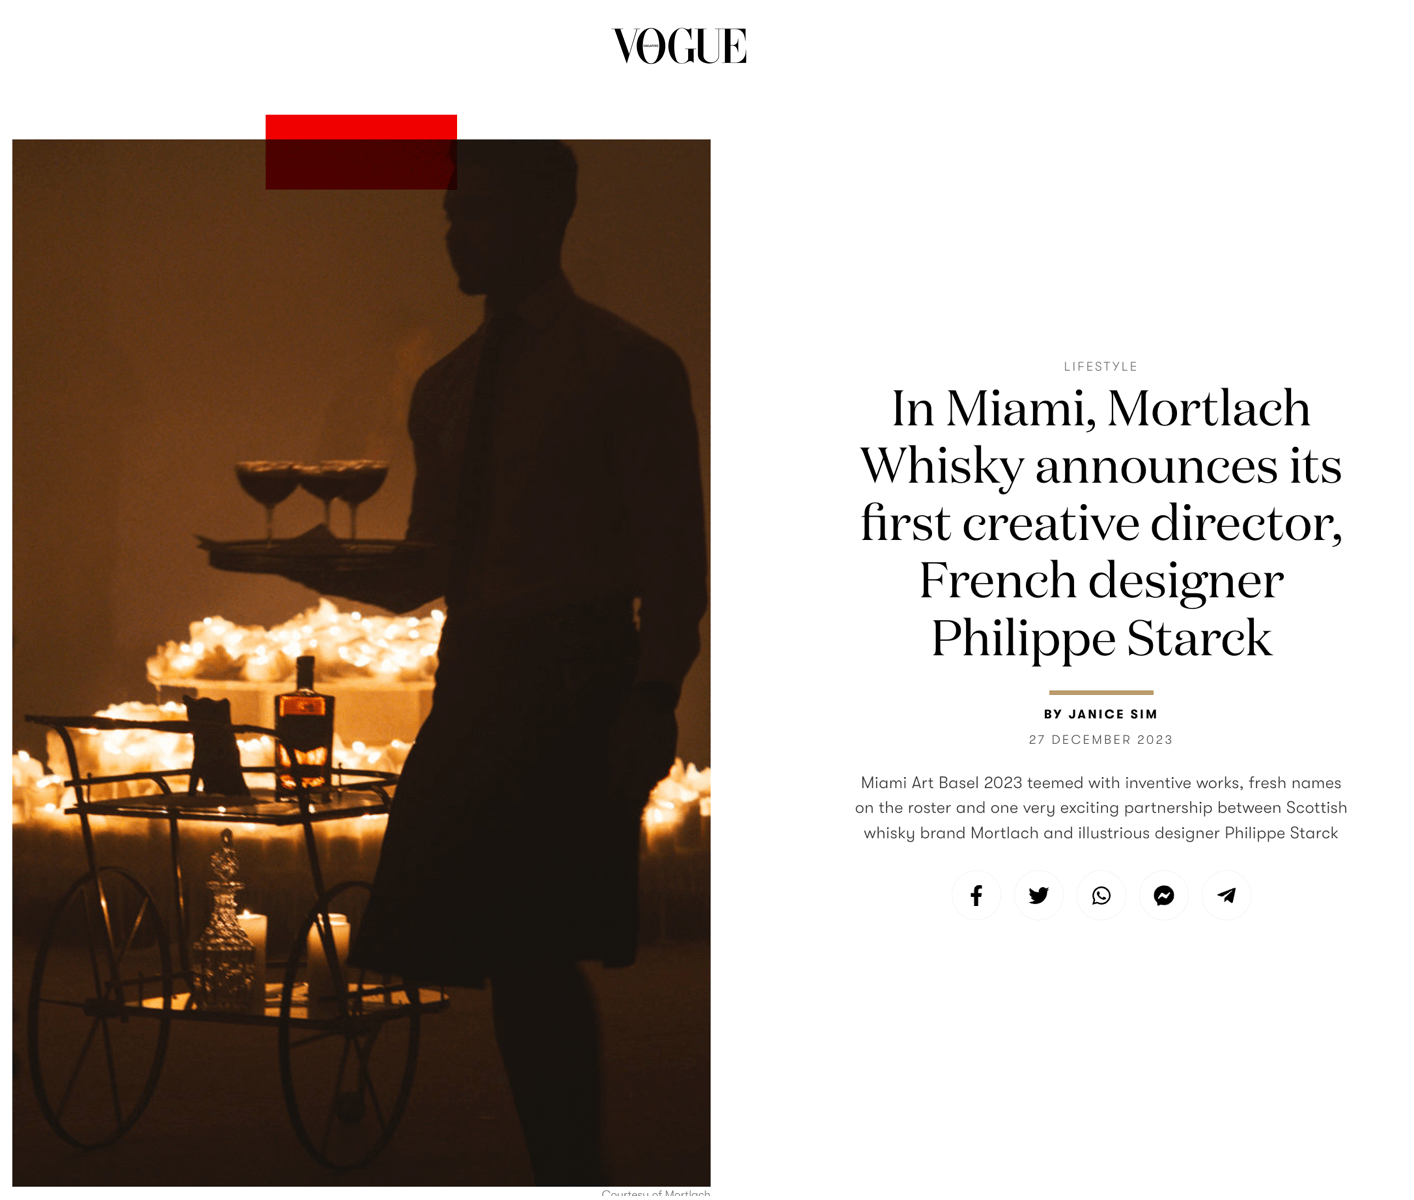 In Miami, Mortlach Whisky announces its first creative director, French designer Philippe Starck